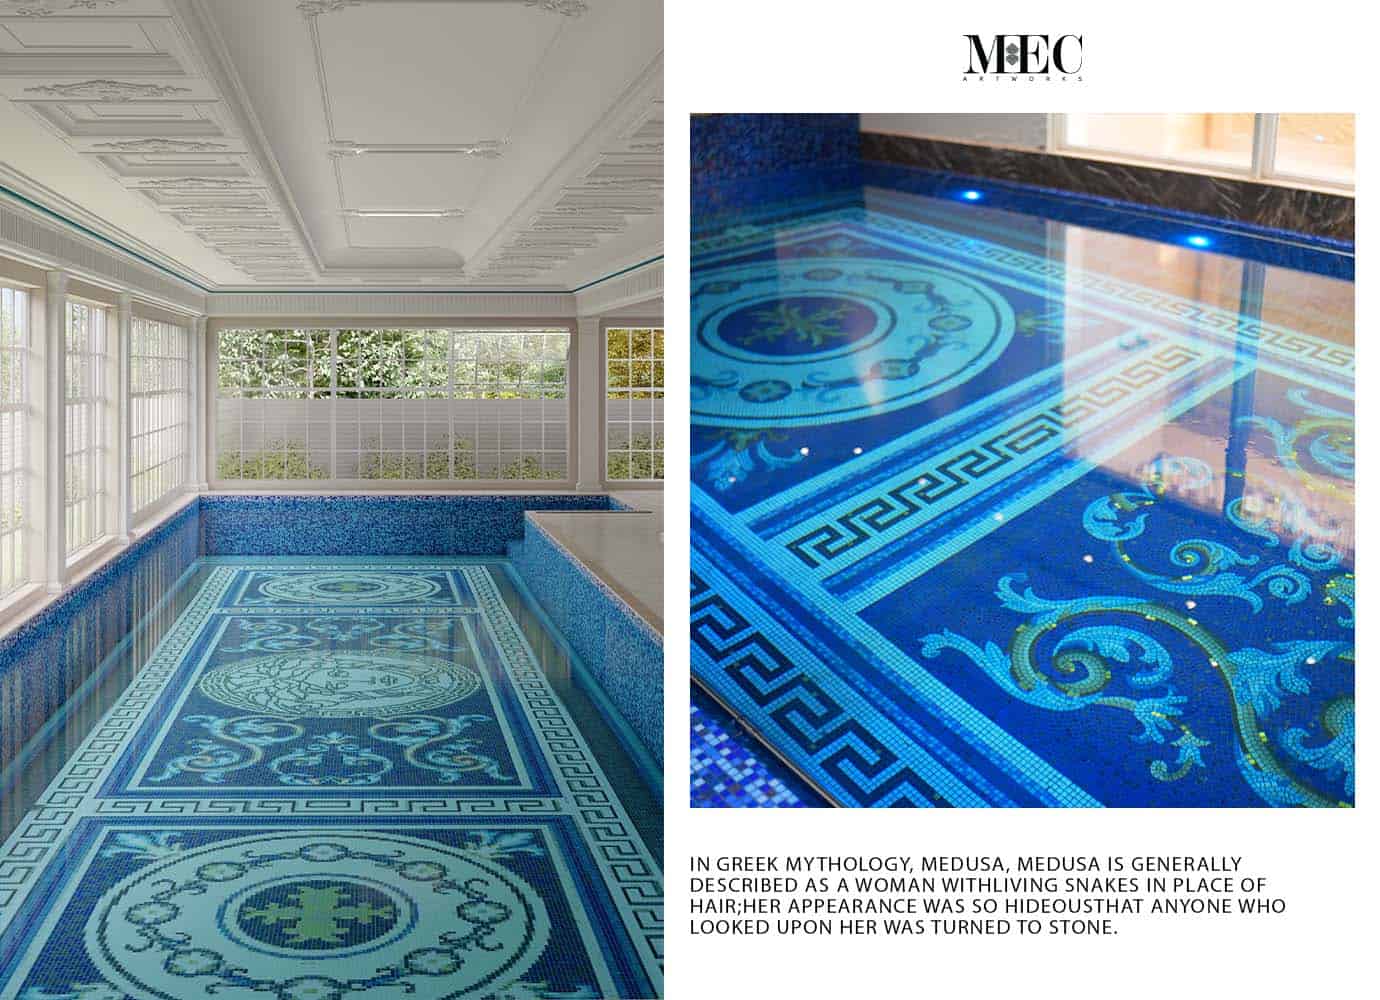 An indoor pool featuring intricate mosaic designs inspired by Greek mythology, specifically Medusa. The left side displays the full pool with large windows and detailed ceiling. The right side focuses on the mosaic detailing with accompanying text about Medusa’s myth.